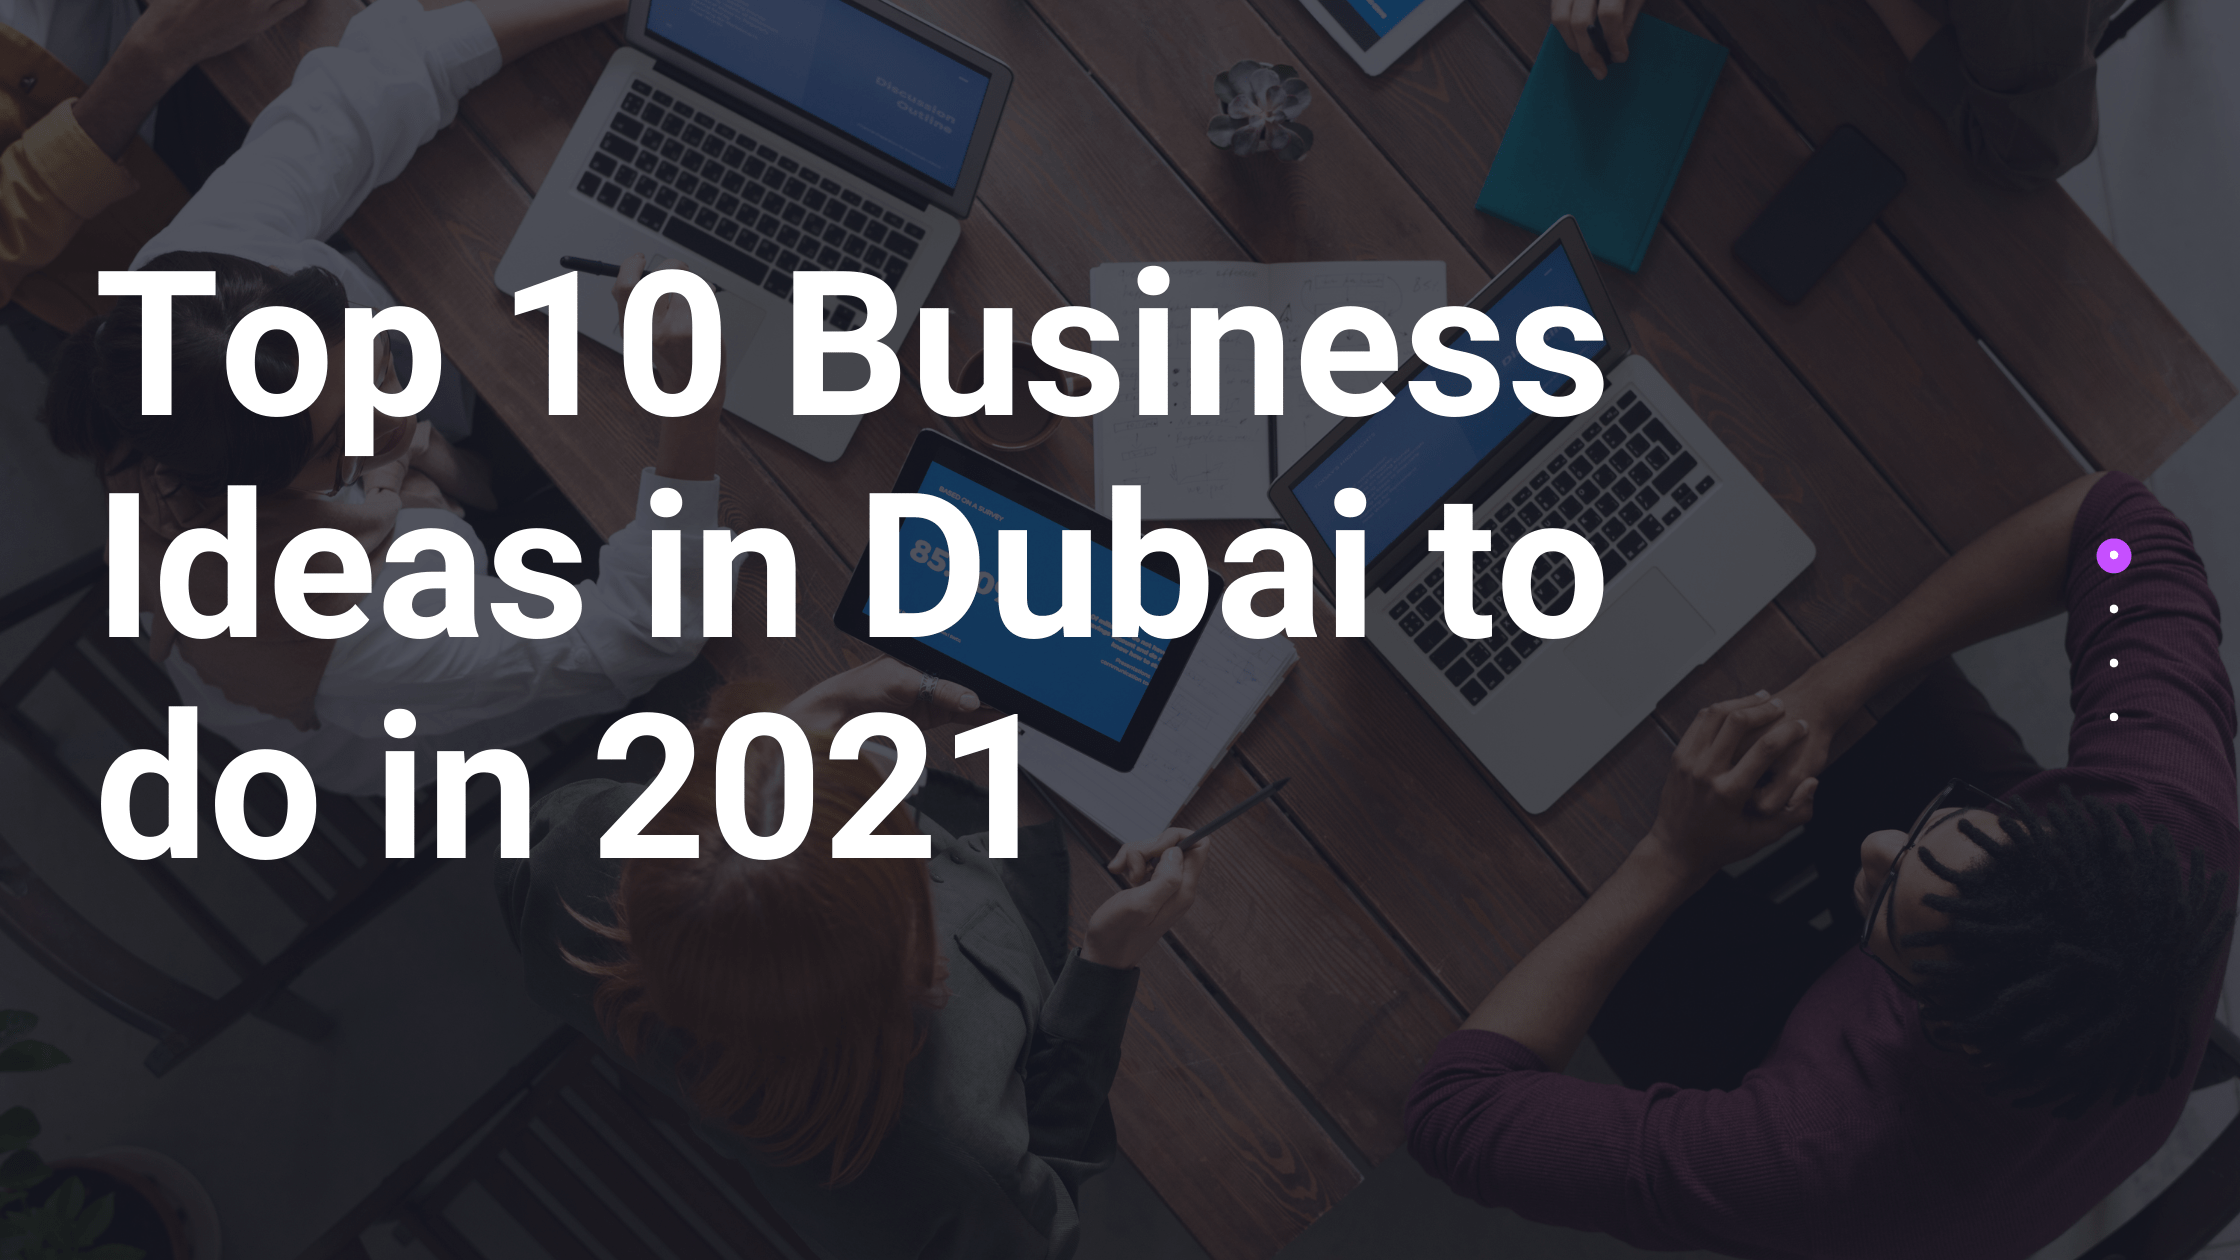 Top 10 Business Ideas in Dubai to do in 2021 - 3s Business Services